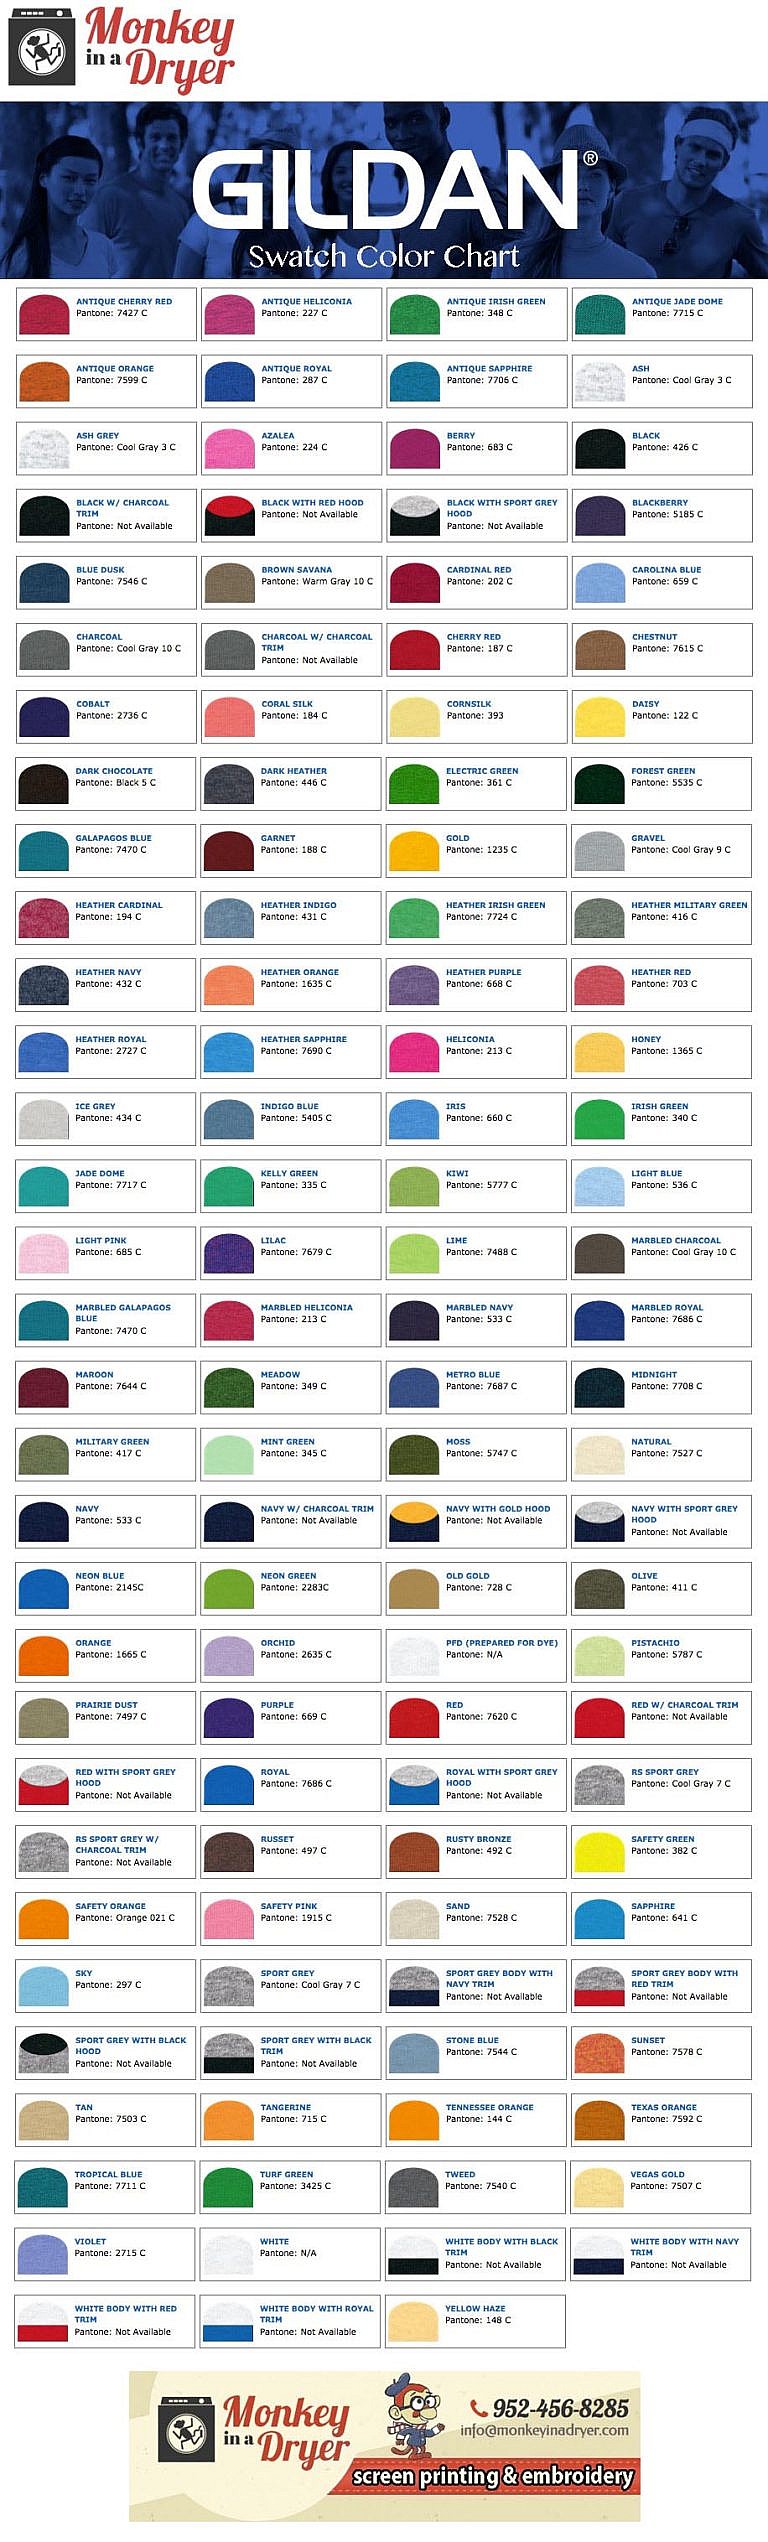 Gildan Swatch Color Chart Custom TShirts from Monkey In A Dryer, A